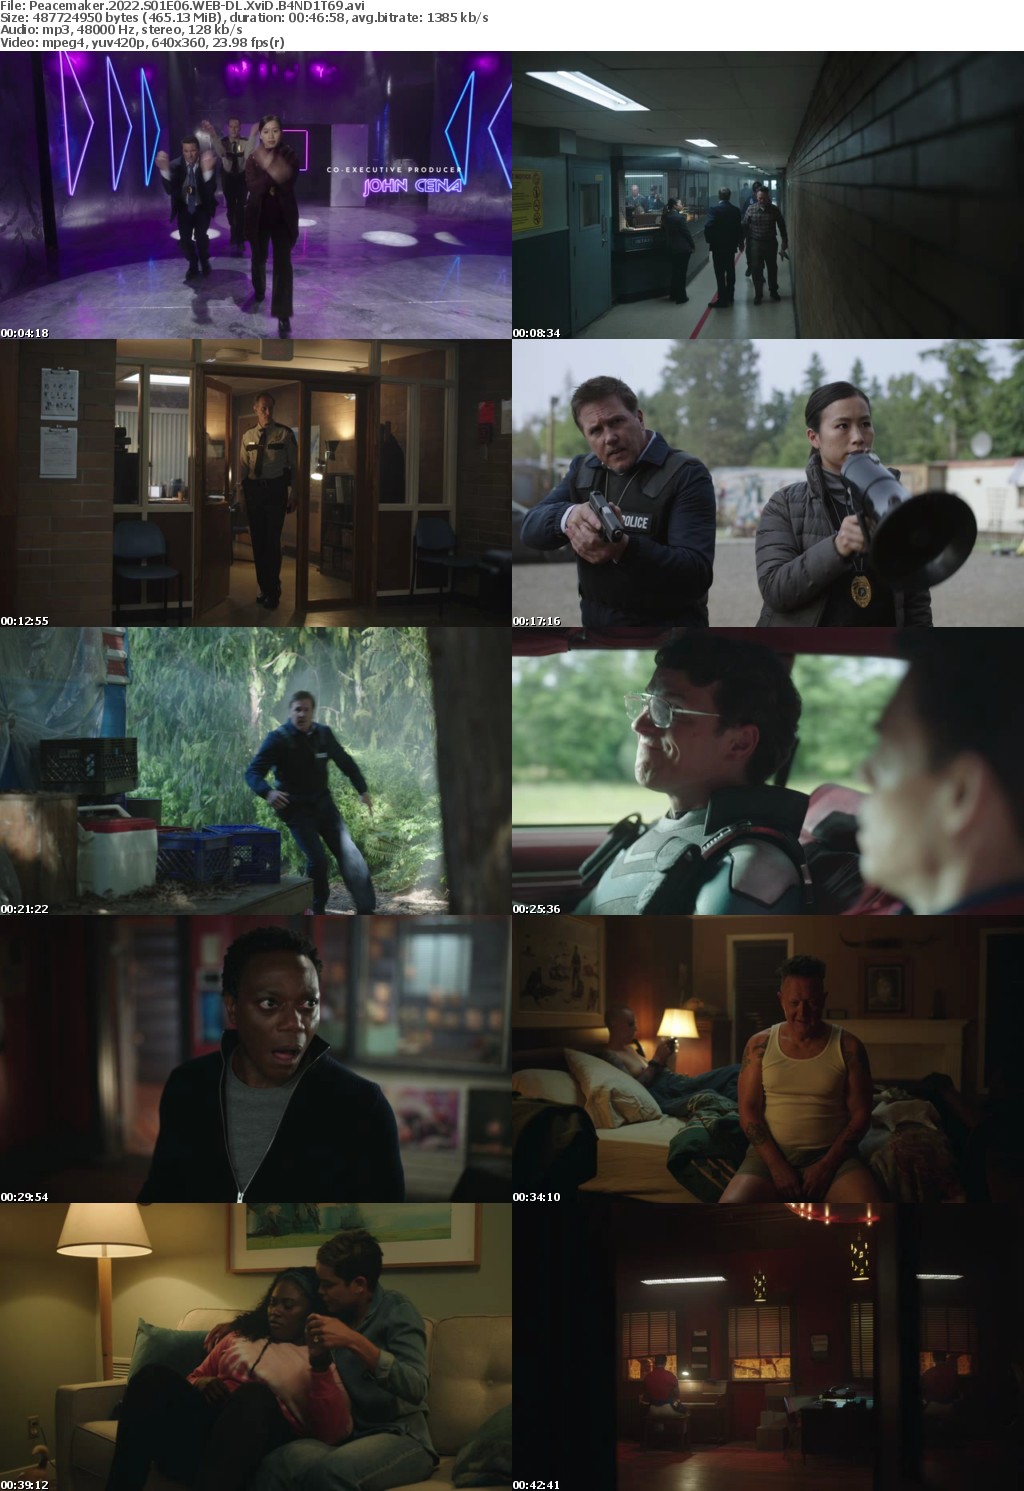 Peacemaker 2022 S01E06 WEB-DL XviD B4ND1T69